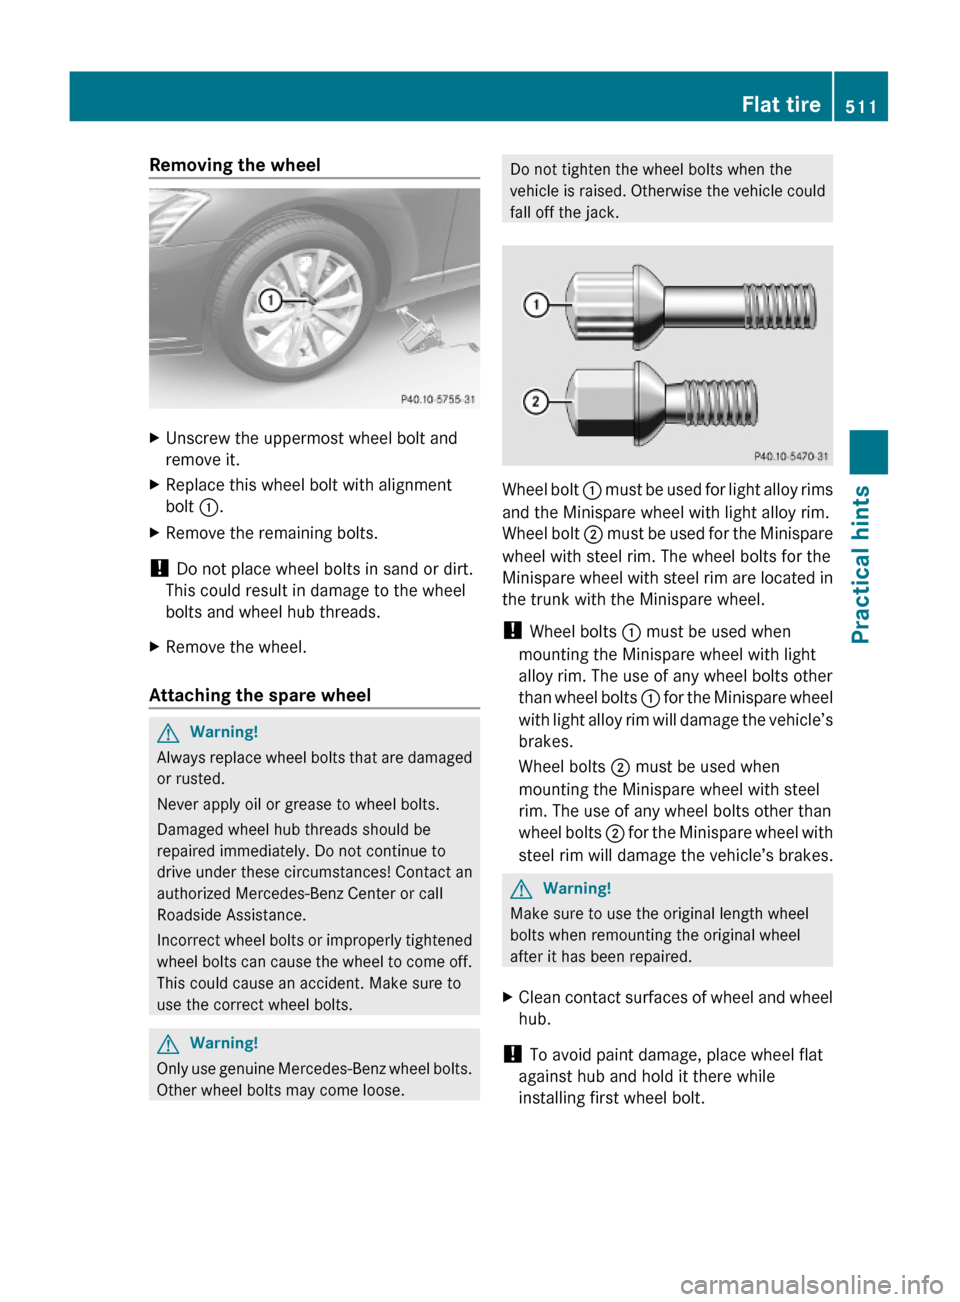 MERCEDES-BENZ S550 4MATIC 2010 W221 Service Manual Removing the wheelXUnscrew the uppermost wheel bolt and
remove it.
XReplace this wheel bolt with alignment
bolt :.
XRemove the remaining bolts.
! Do not place wheel bolts in sand or dirt.
This could r